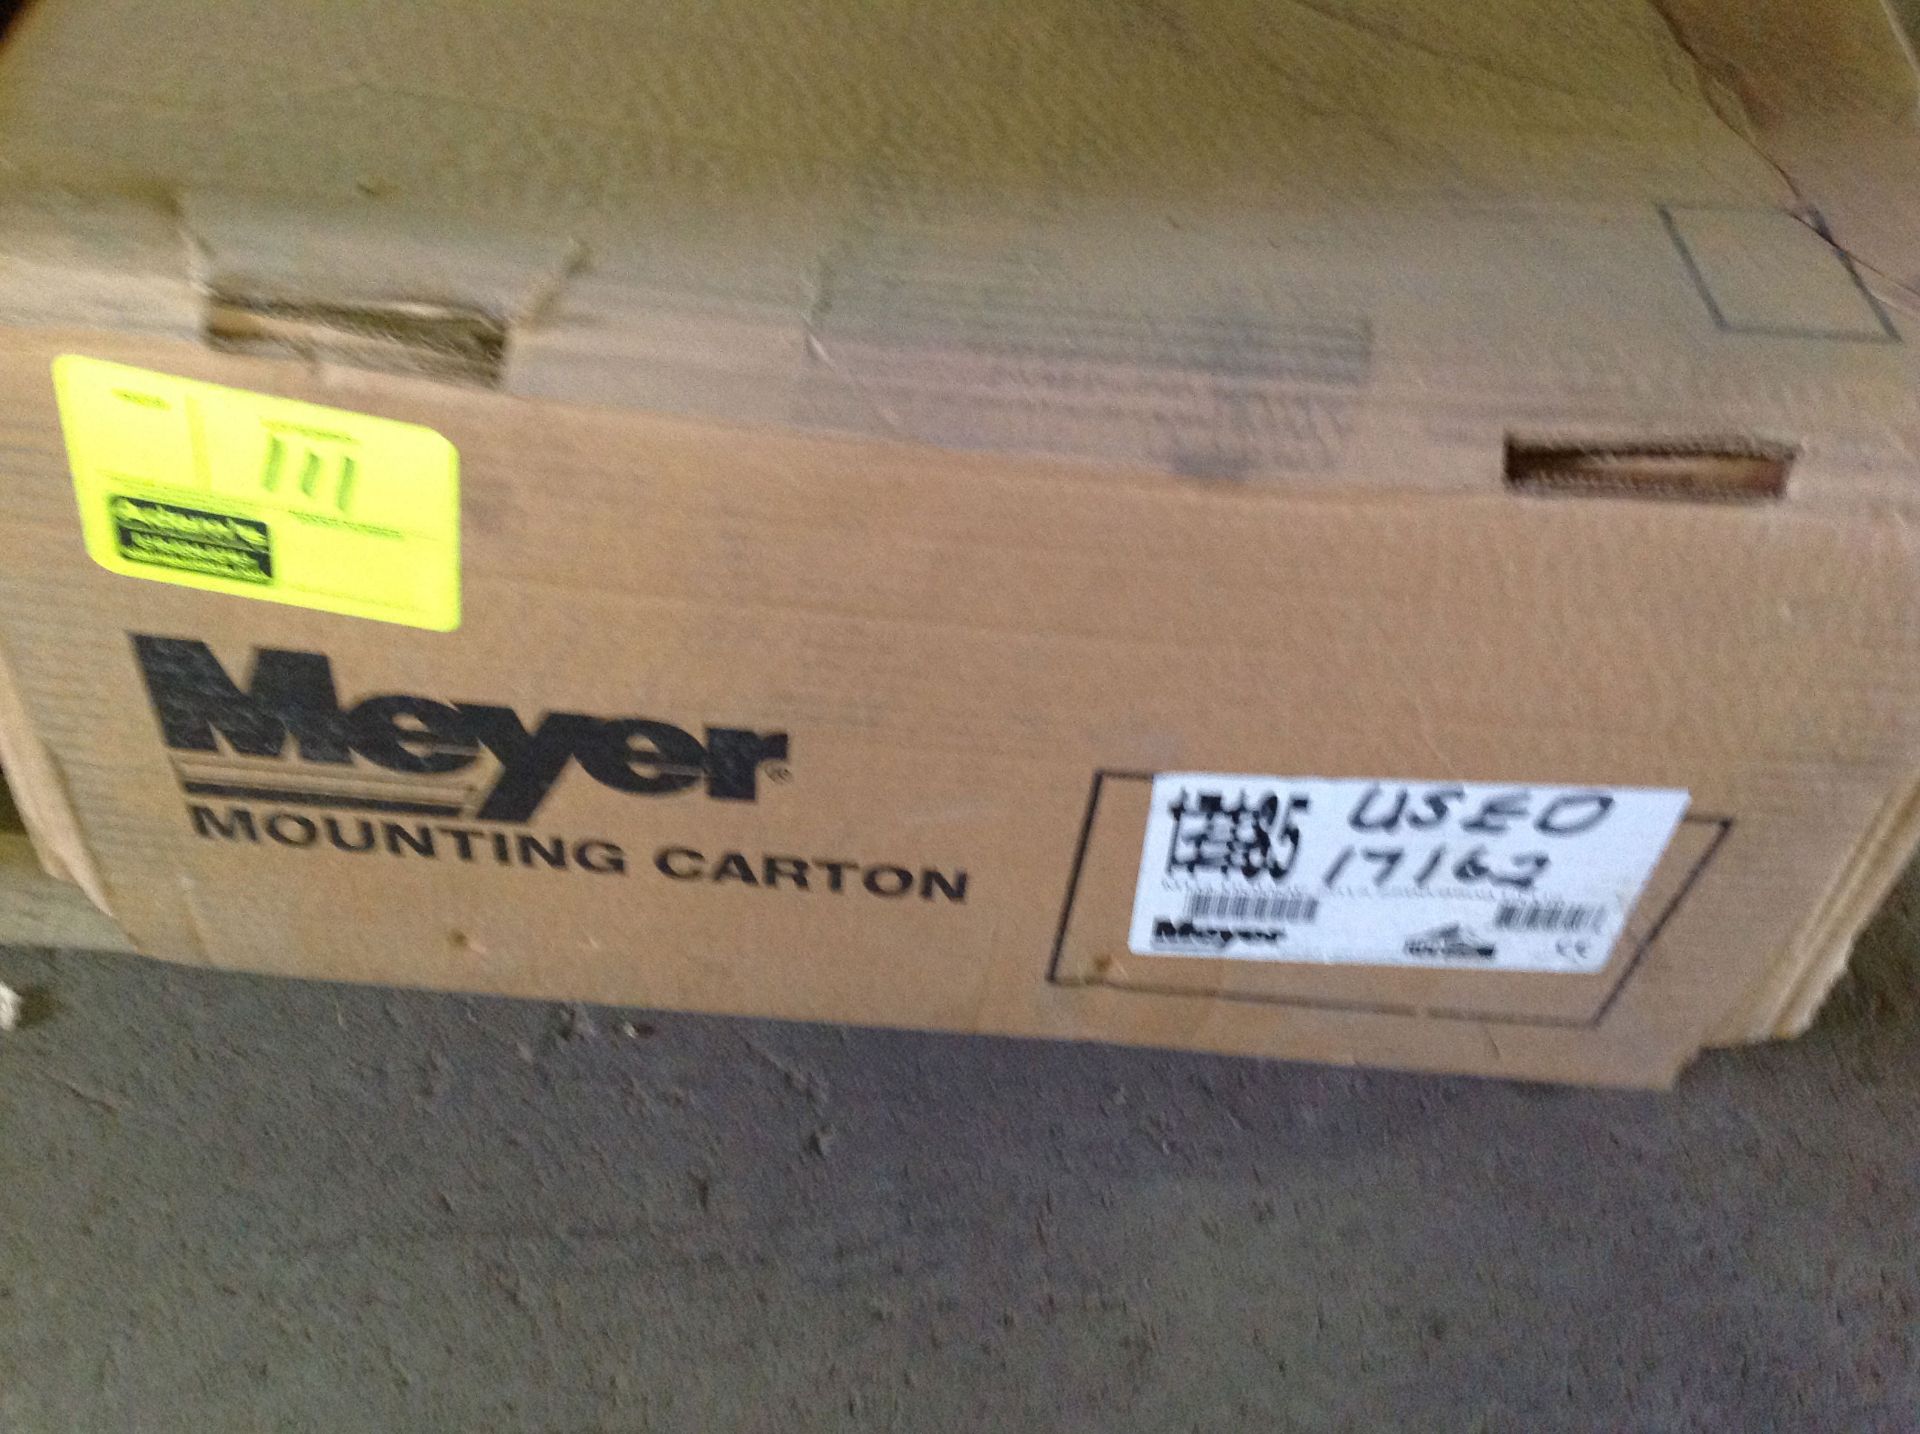 Meyer Mounting Hardware New in Box. For Dodge. Model#17162